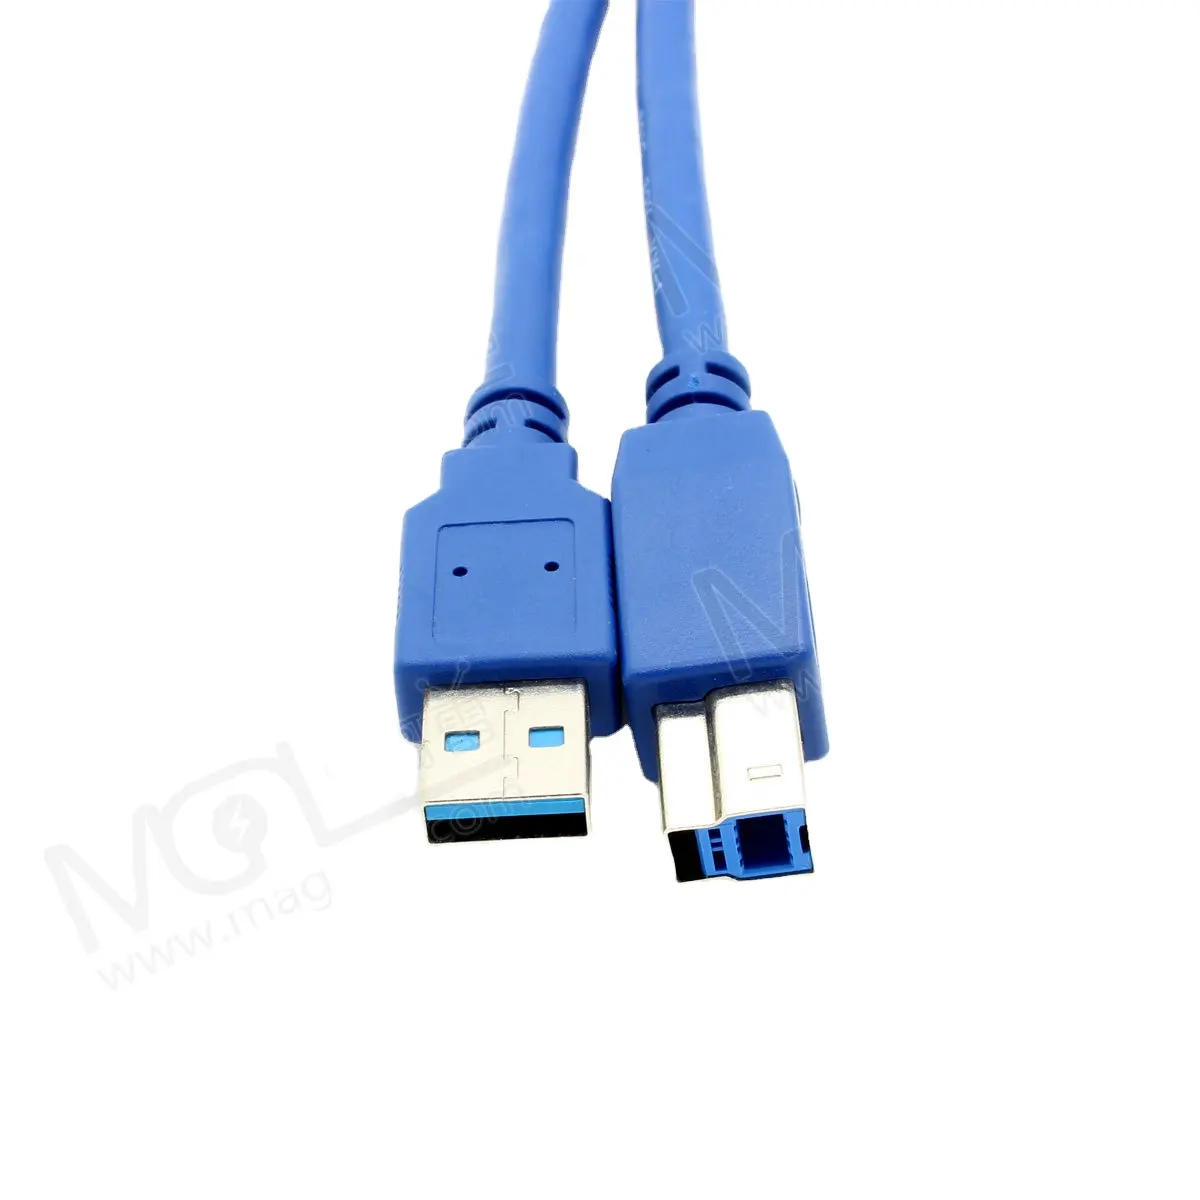 USB Printer Cable USB 3.0 Print Cable type A Male to B Male extension cable for Canon Epson HP Printer Computer Accessories